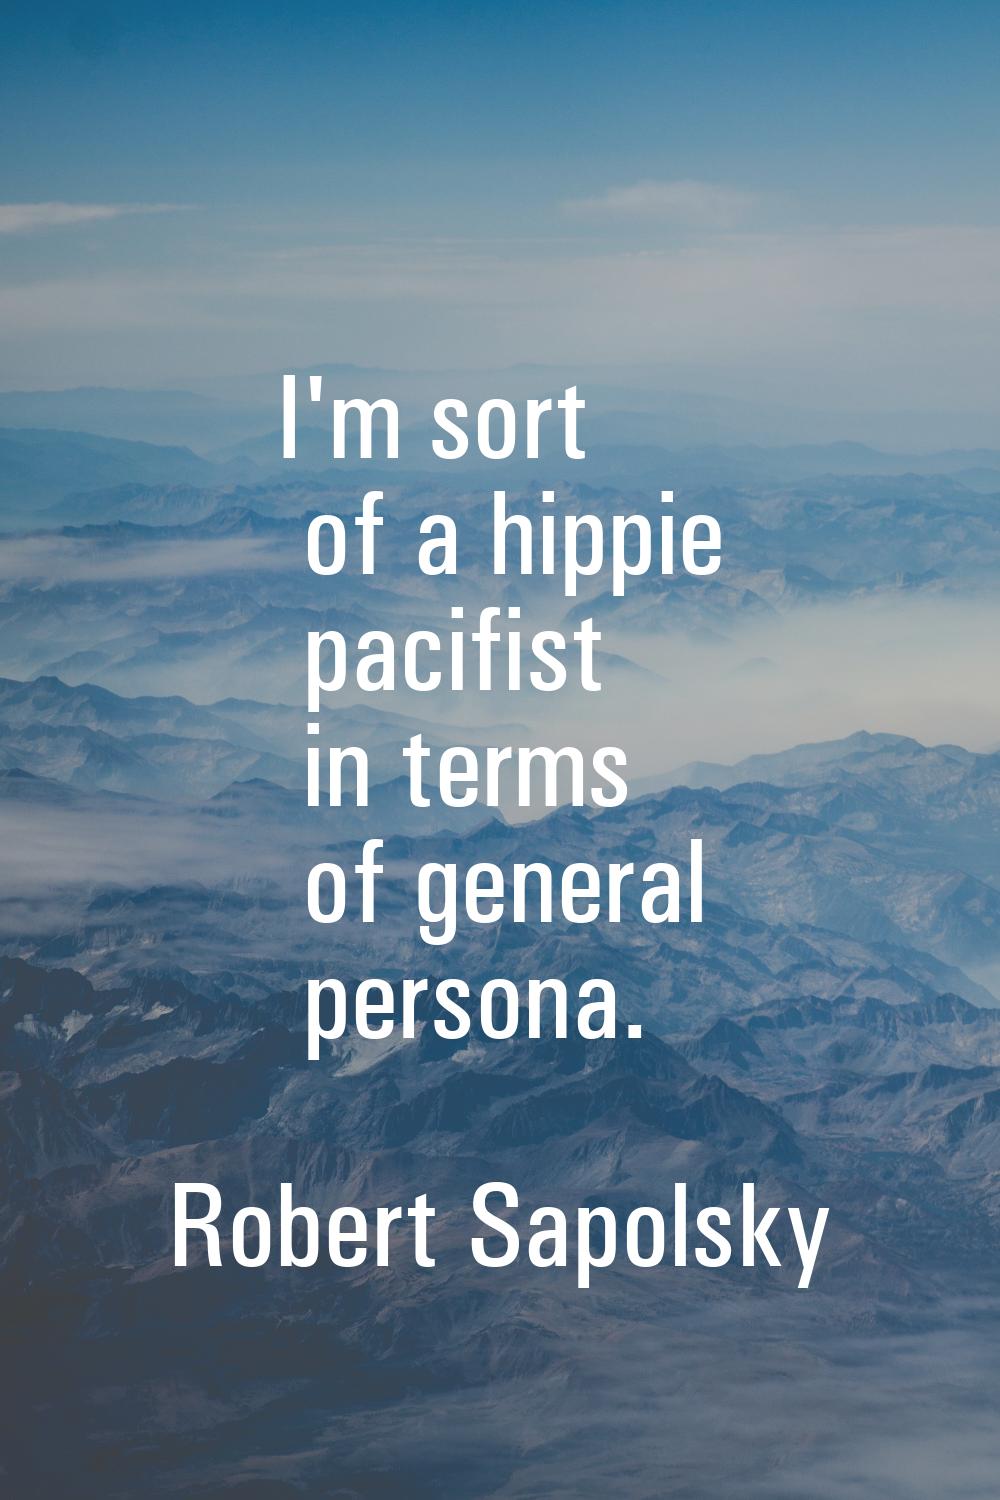 I'm sort of a hippie pacifist in terms of general persona.